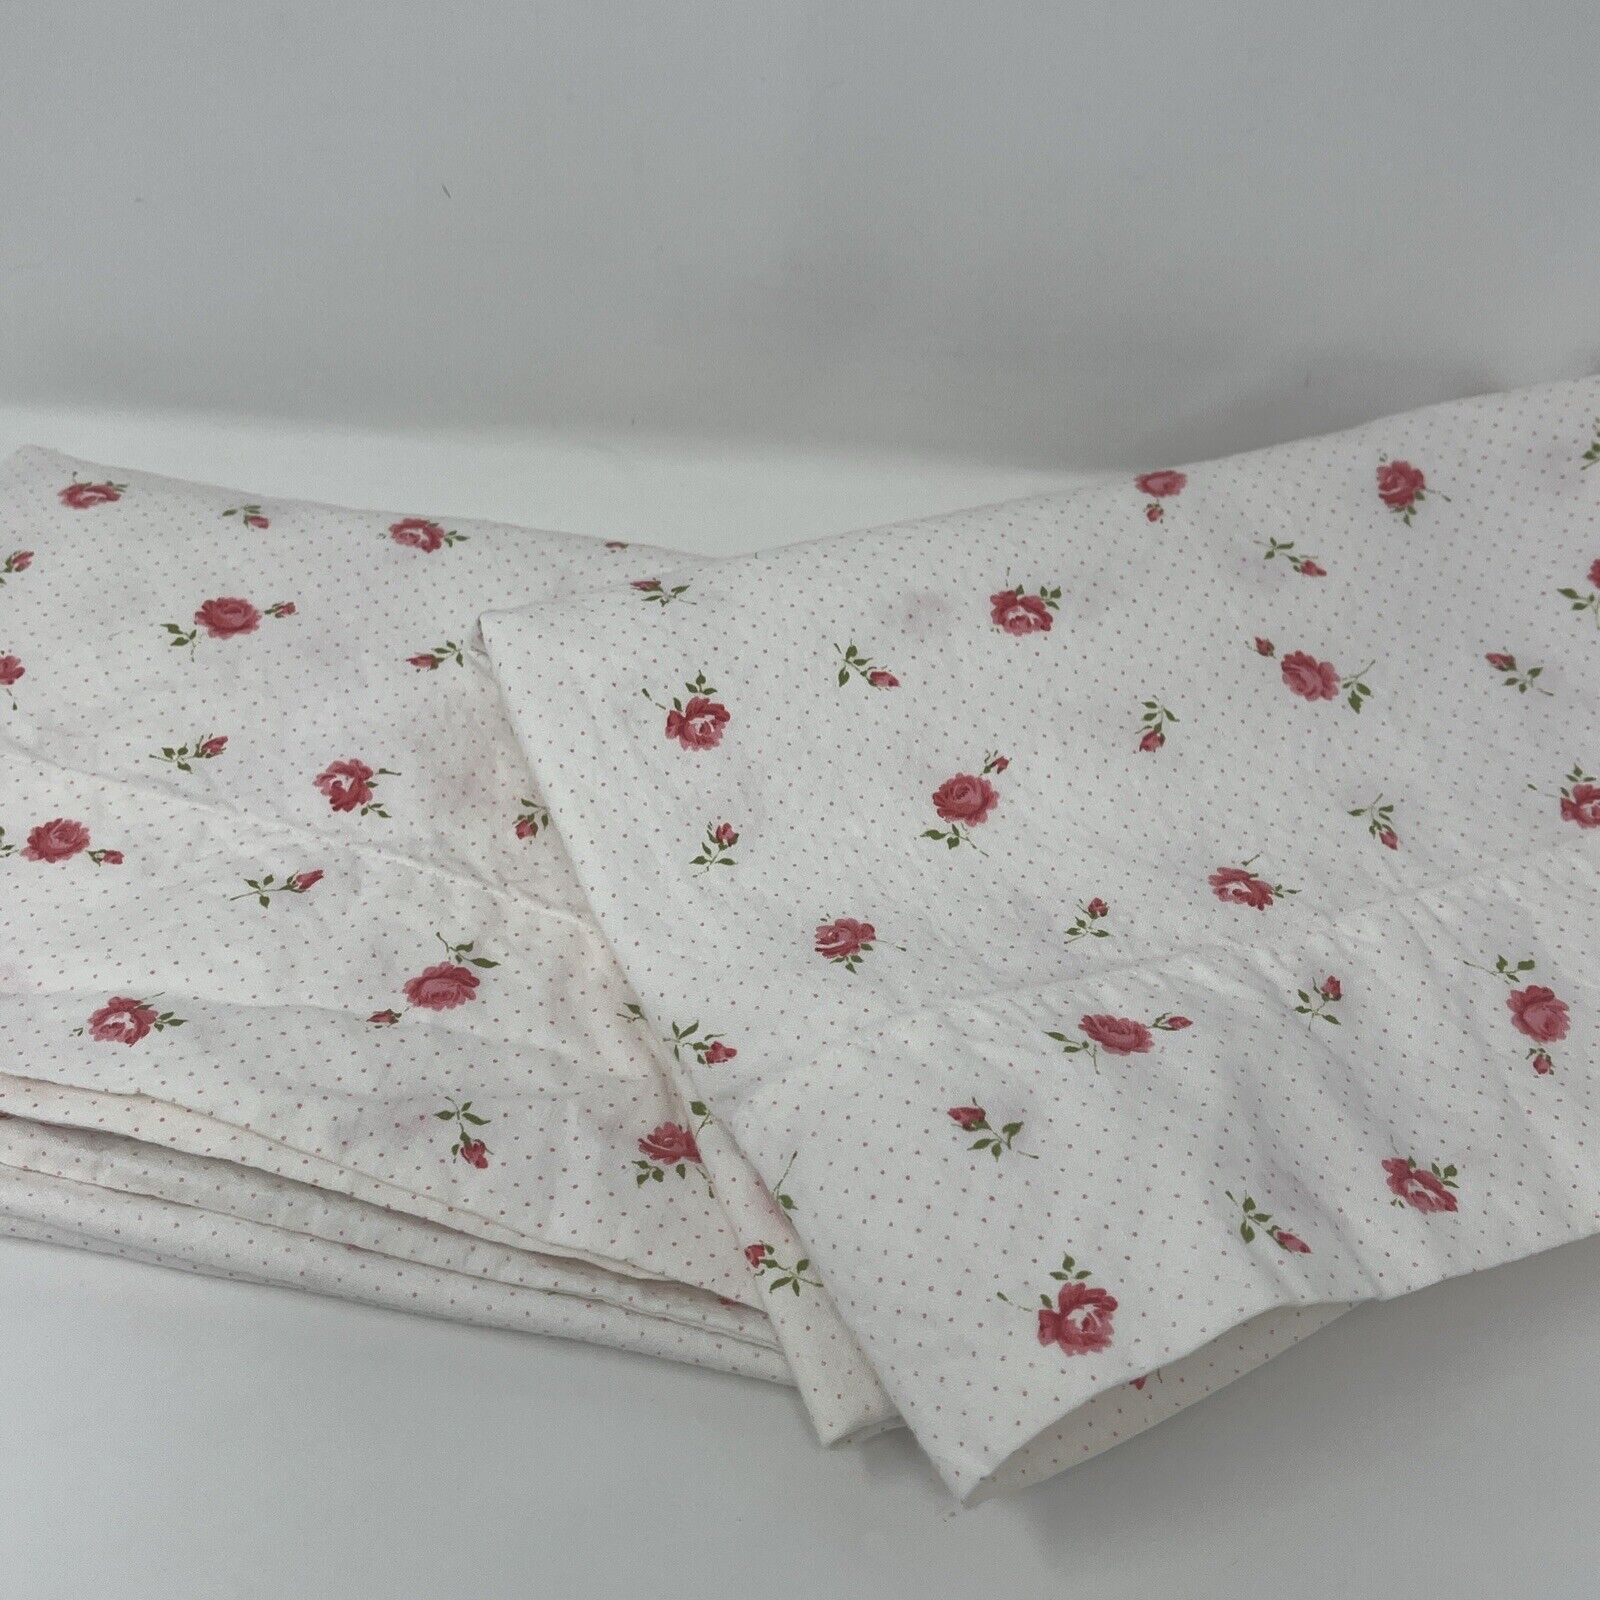 Vintage 2  Floral Print Pillowcases Penney\'s Nationwide Cotton Pink Dot Floral